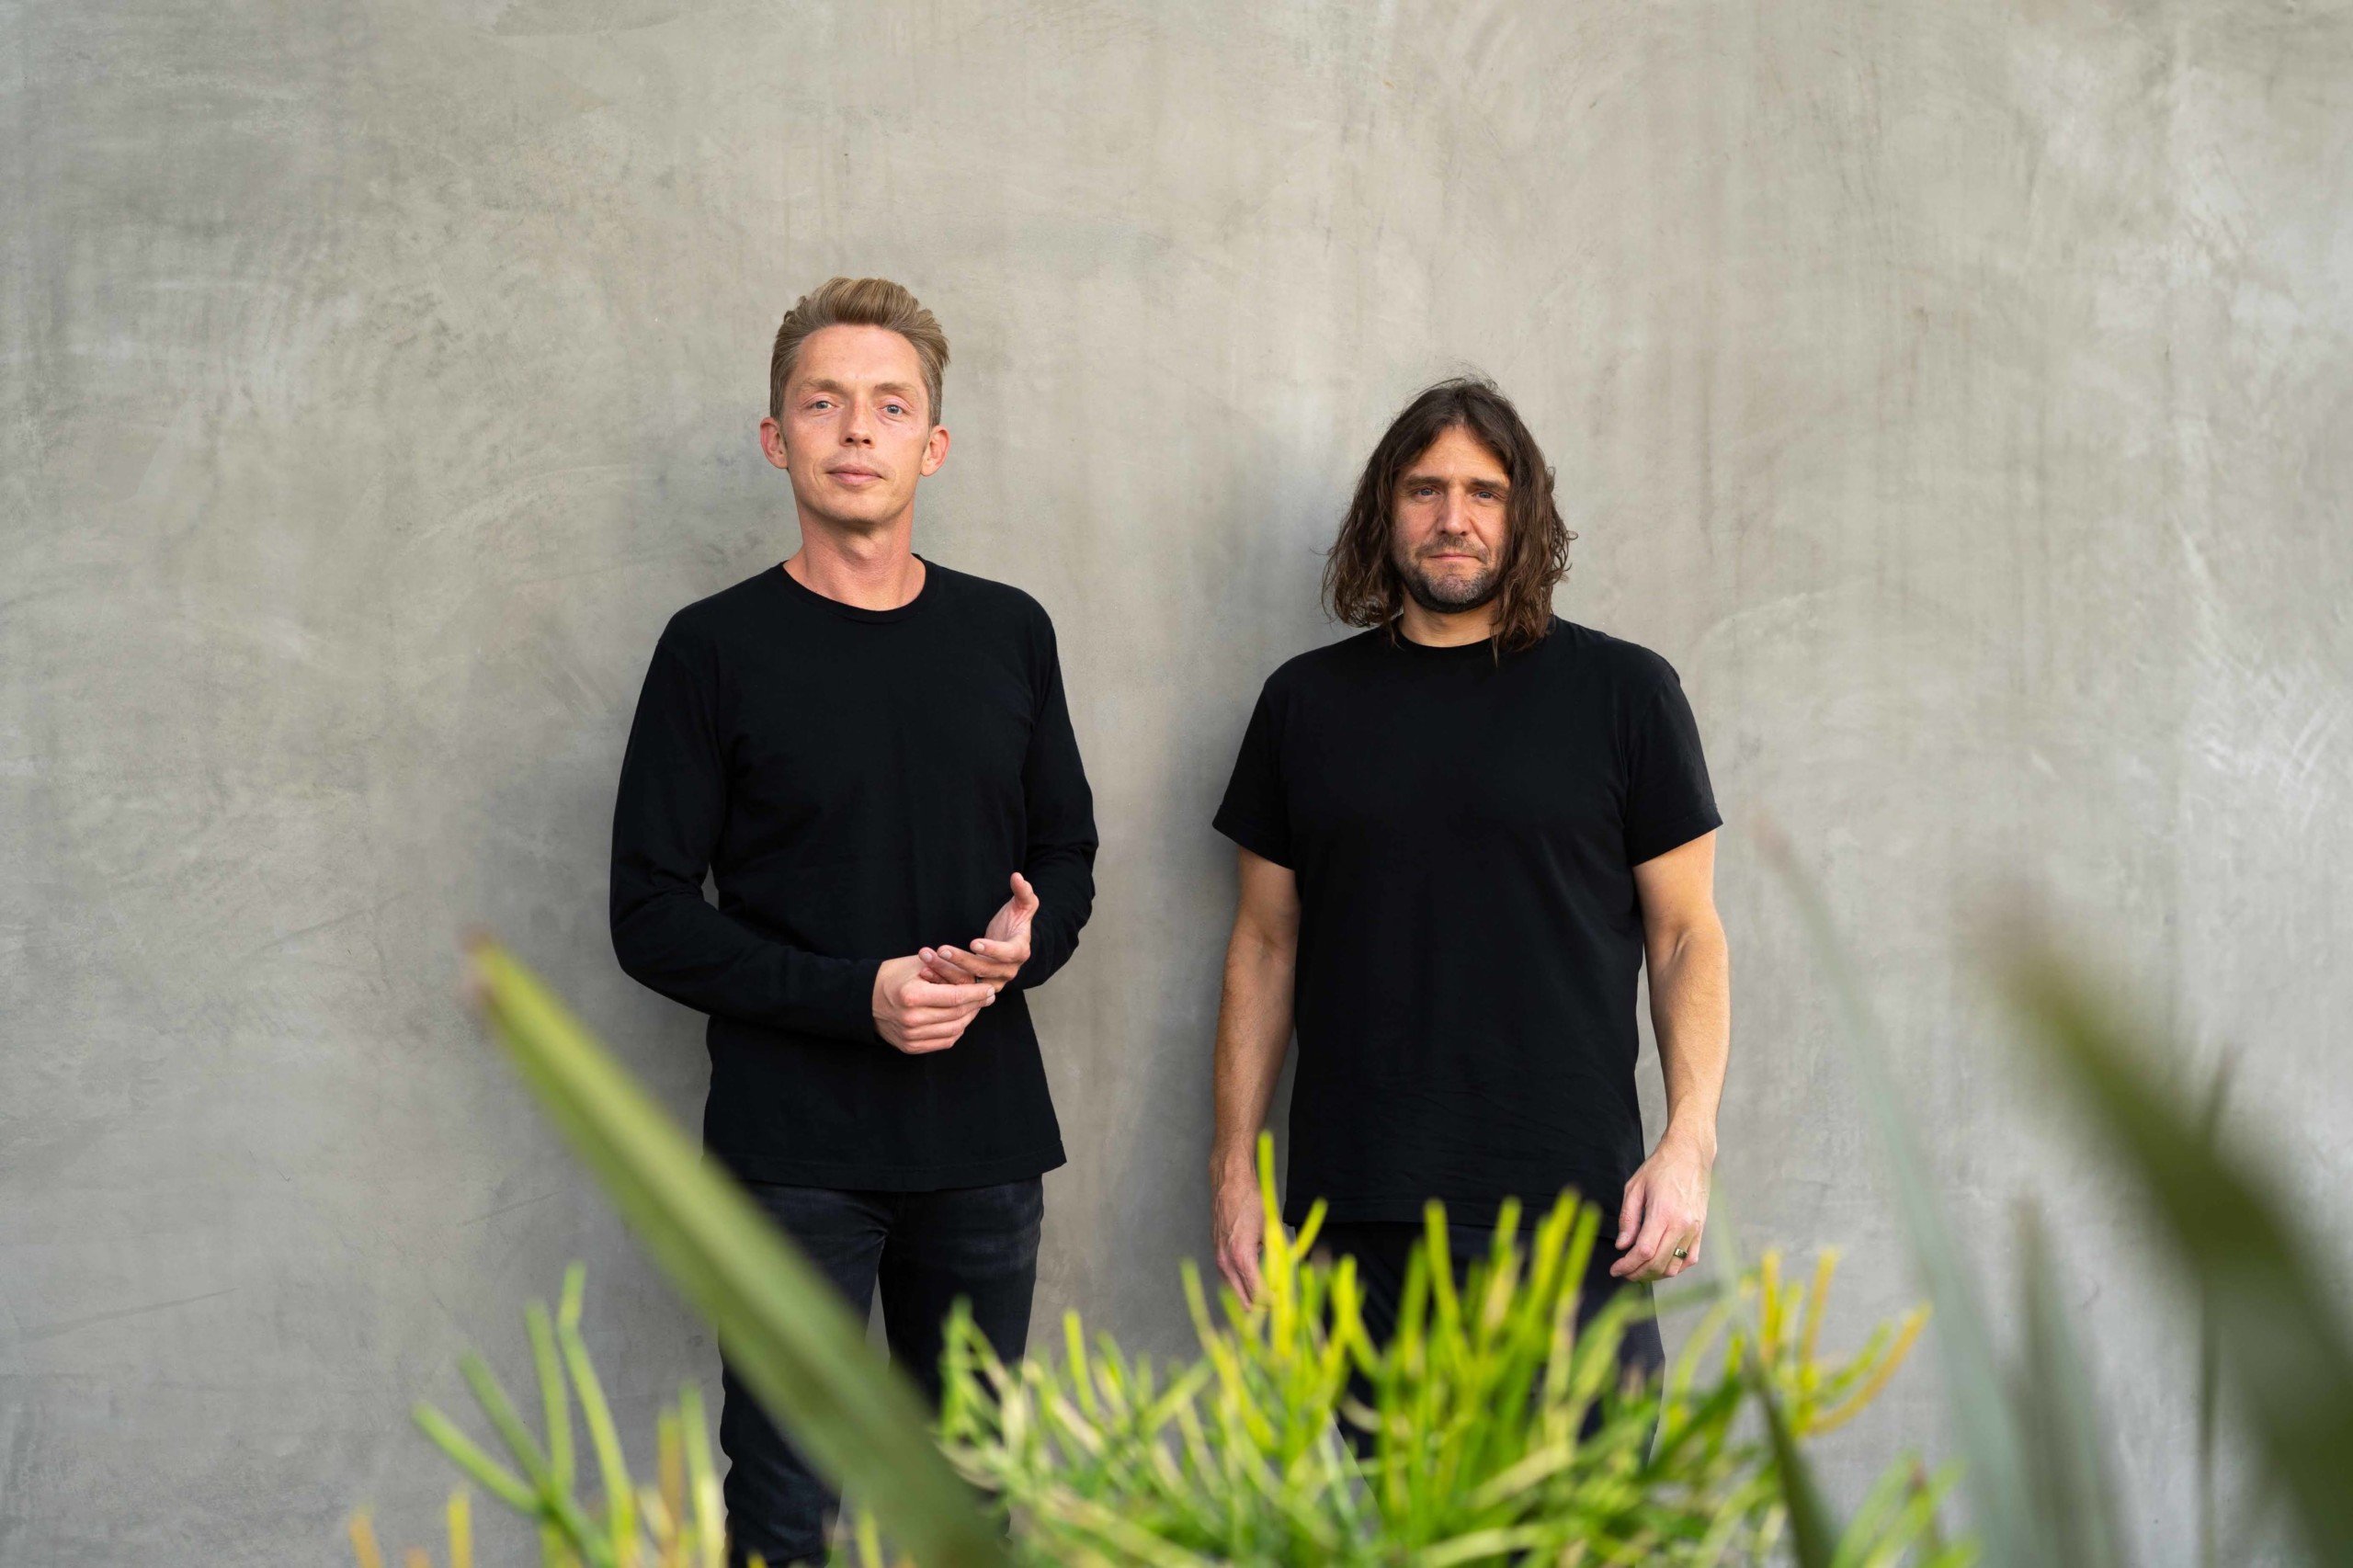 In episode 431 with The Minimalists Joshua Fields Millburn and Ryan Nicodemus we talk all about how to add more meaning into your life.